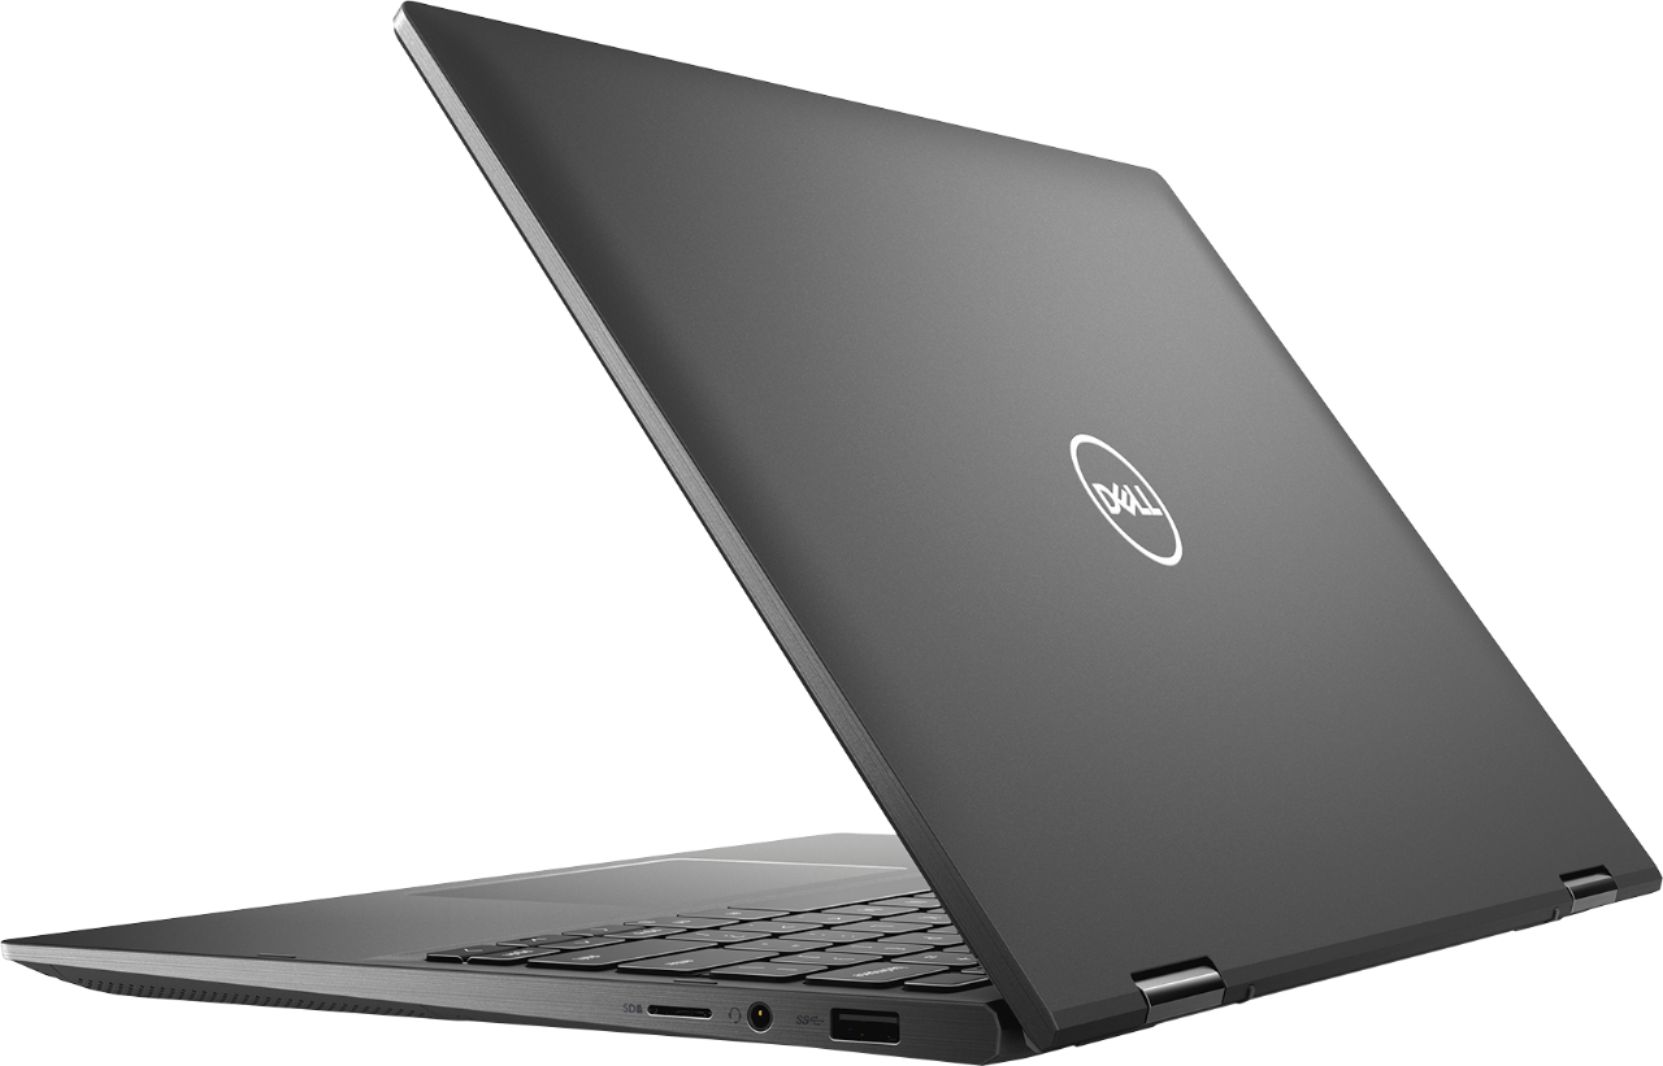 Dell inspiron 13 7000 series 2 in 1 best buy Dell Inspiron 13 7000 2 In 1 13 3 4k Ultra Hd Touch Screen Laptop Intel Core I7 16gb Memory 512gb Ssd 32gb Optane Black I7300 7319blk Pus Best Buy